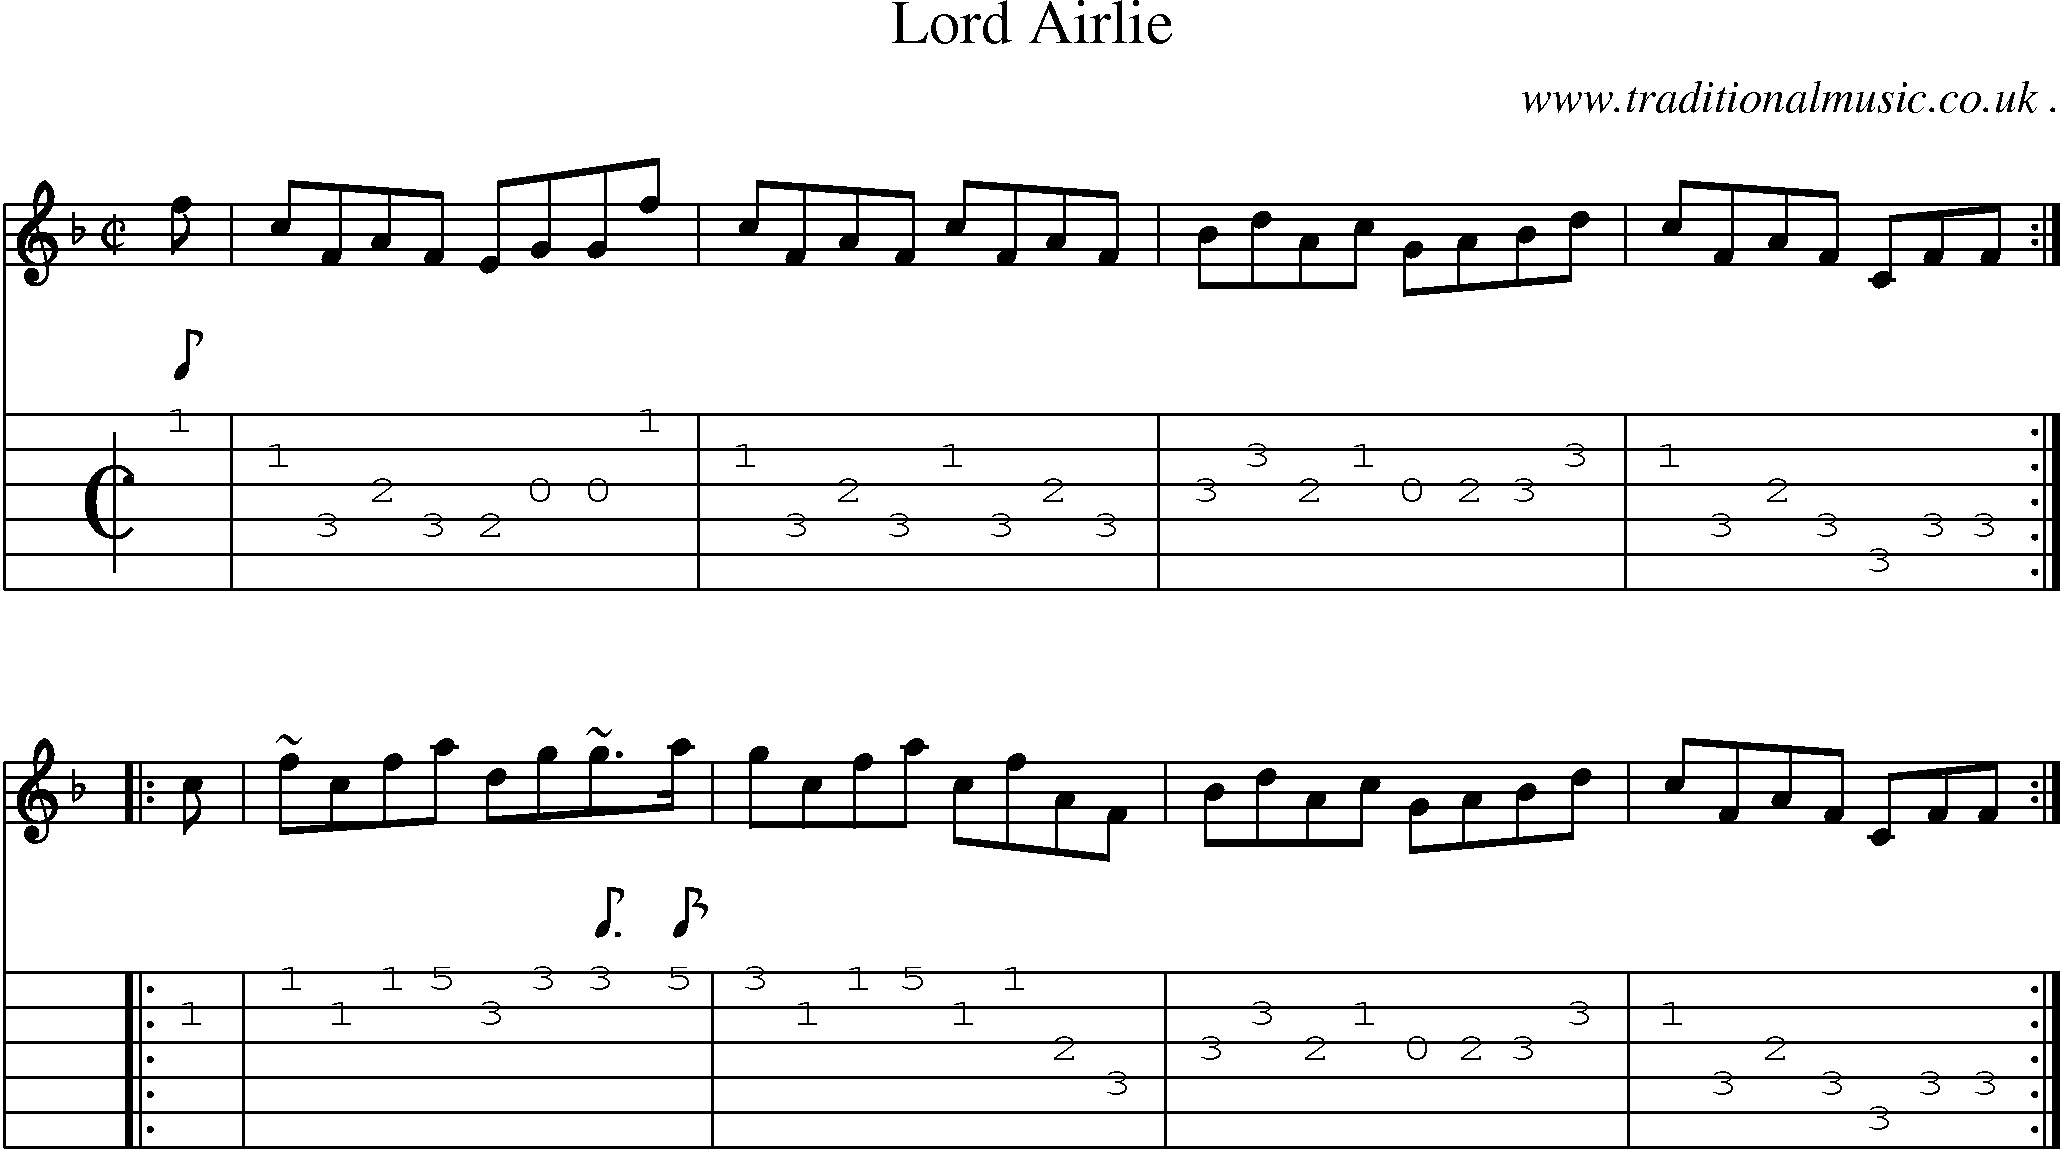 Sheet-music  score, Chords and Guitar Tabs for Lord Airlie